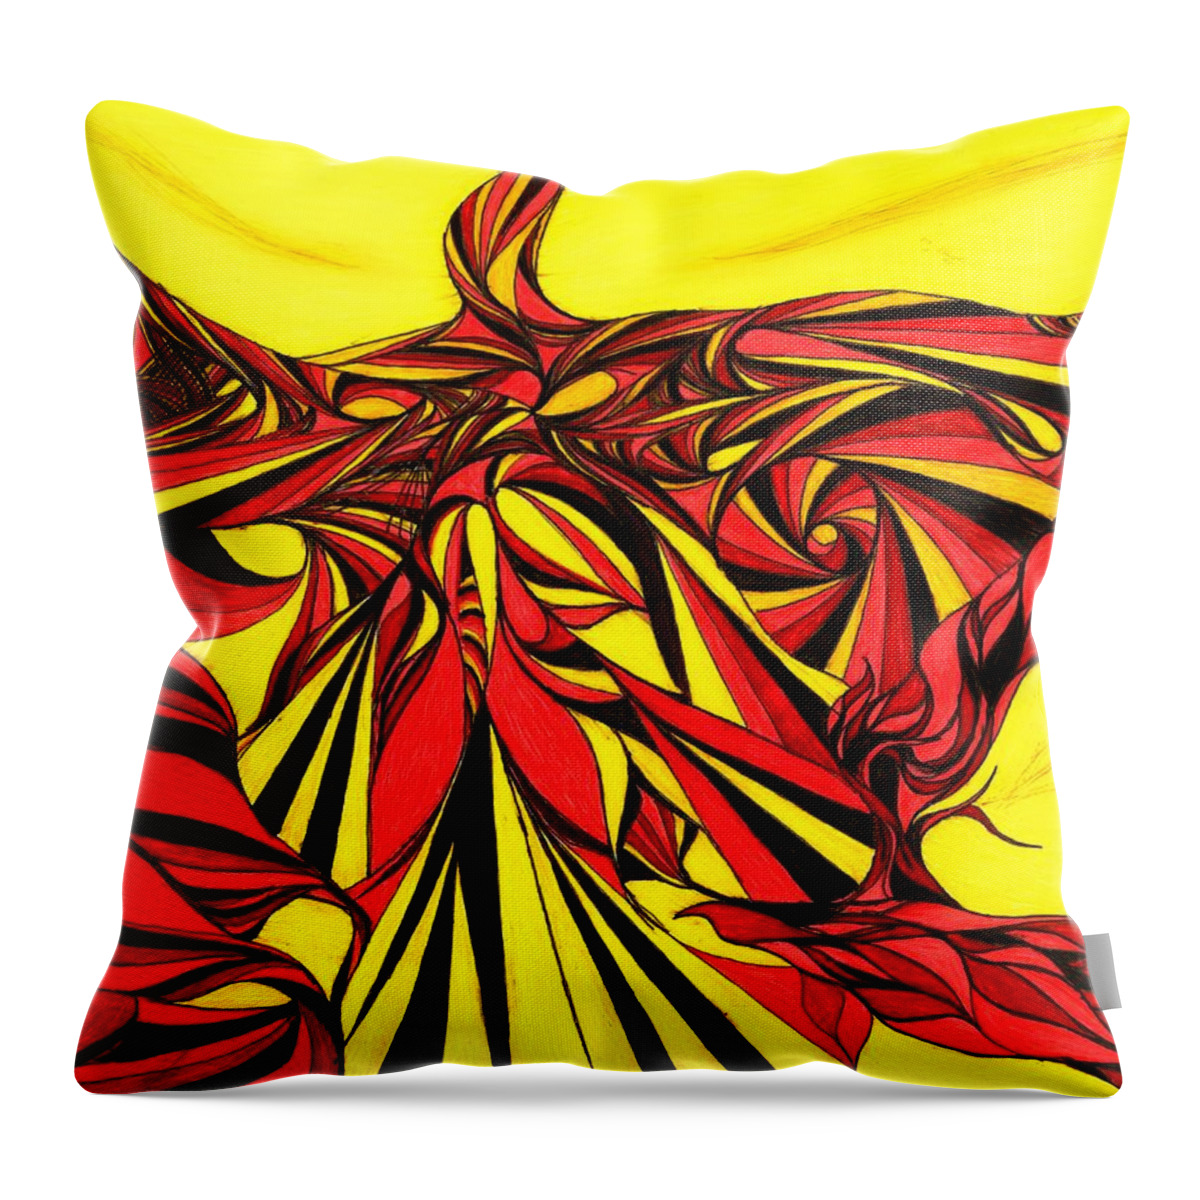 Abstract Throw Pillow featuring the drawing The Iron Lion by Robert Nickologianis